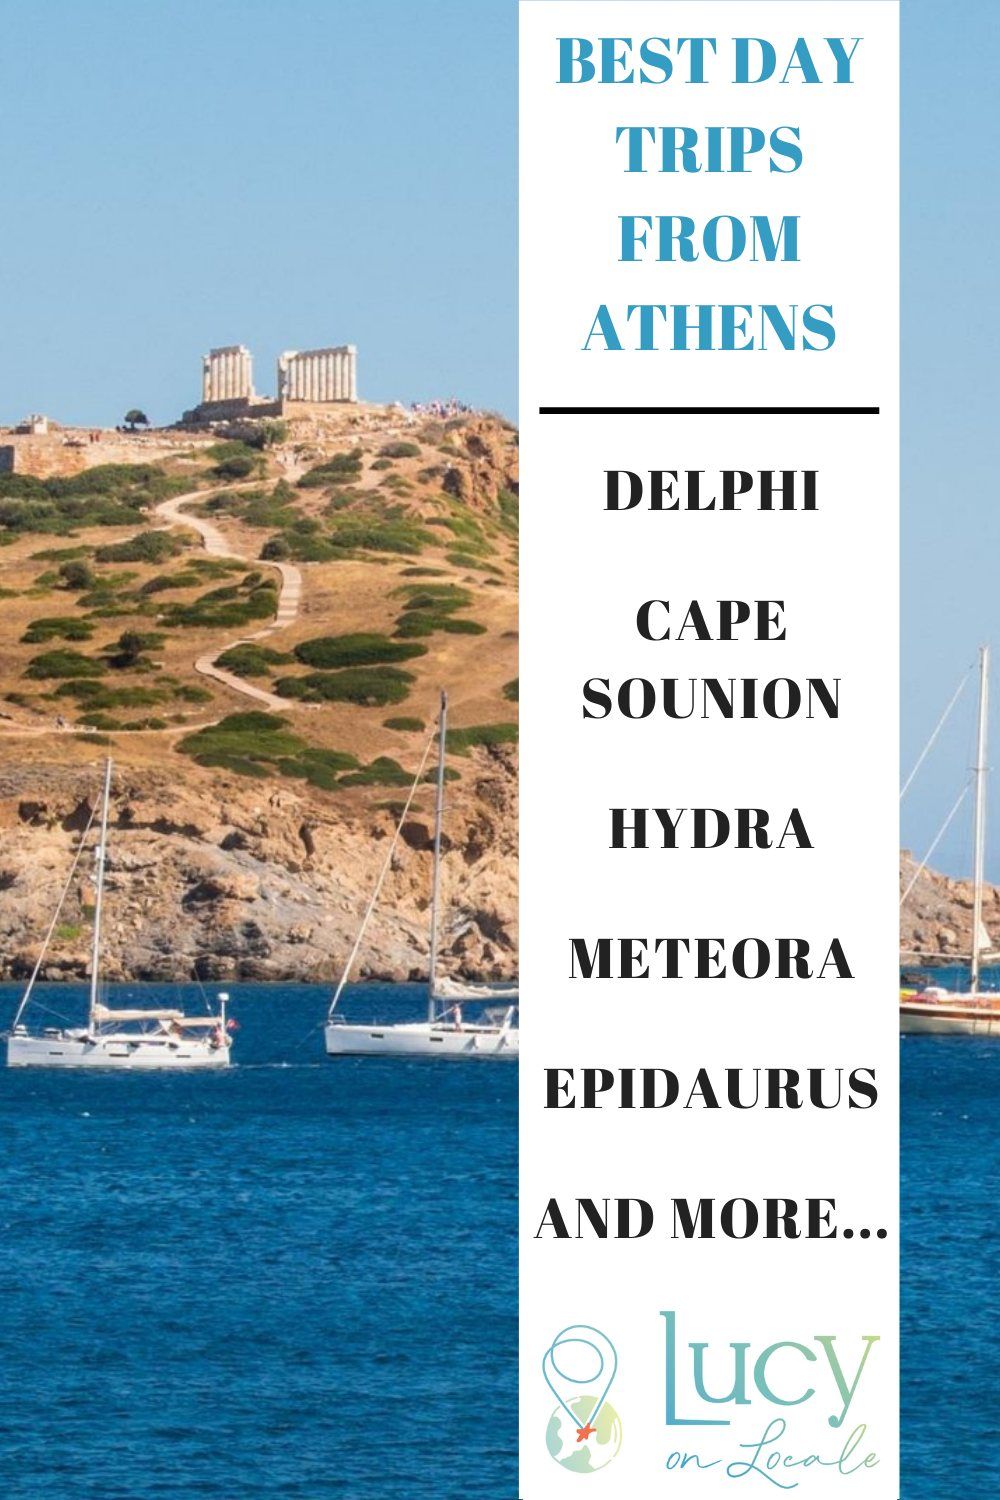 Athens day trips